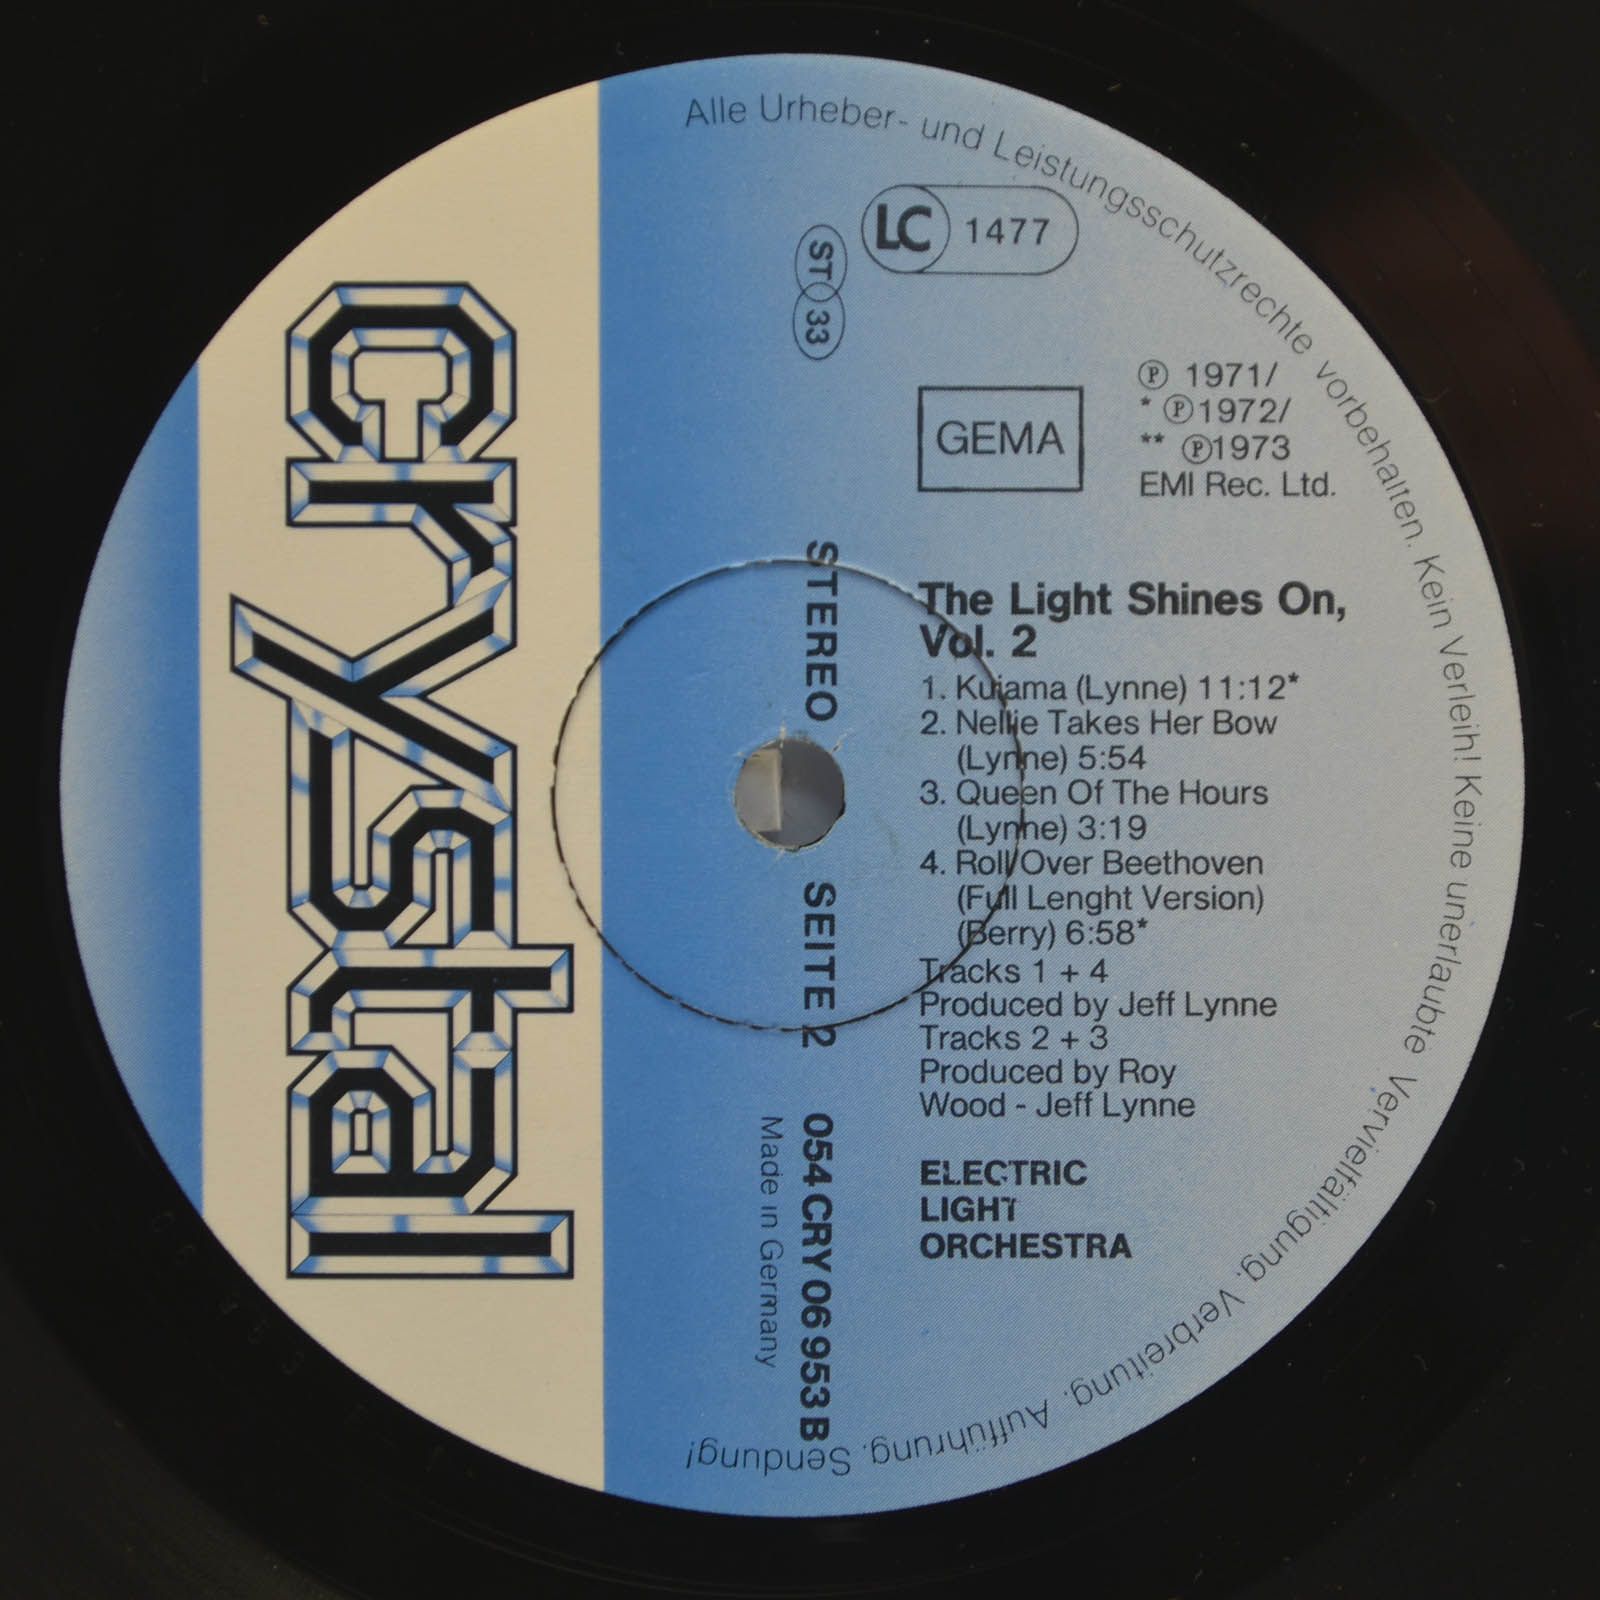 Electric Light Orchestra — The Light Shines On Vol 2, 1979